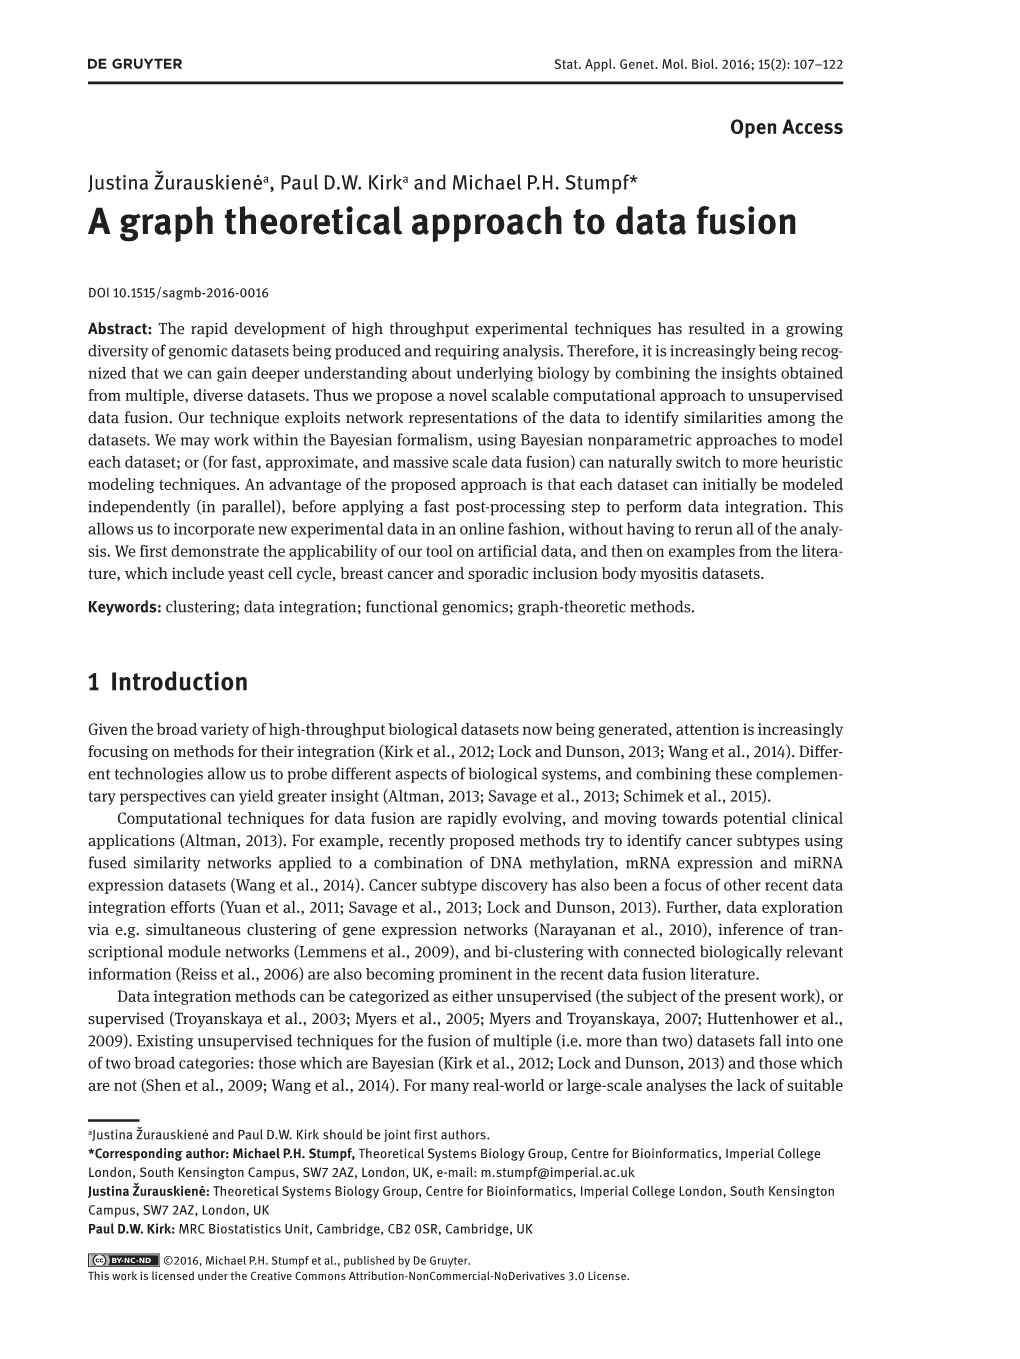 A Graph Theoretical Approach to Data Fusion